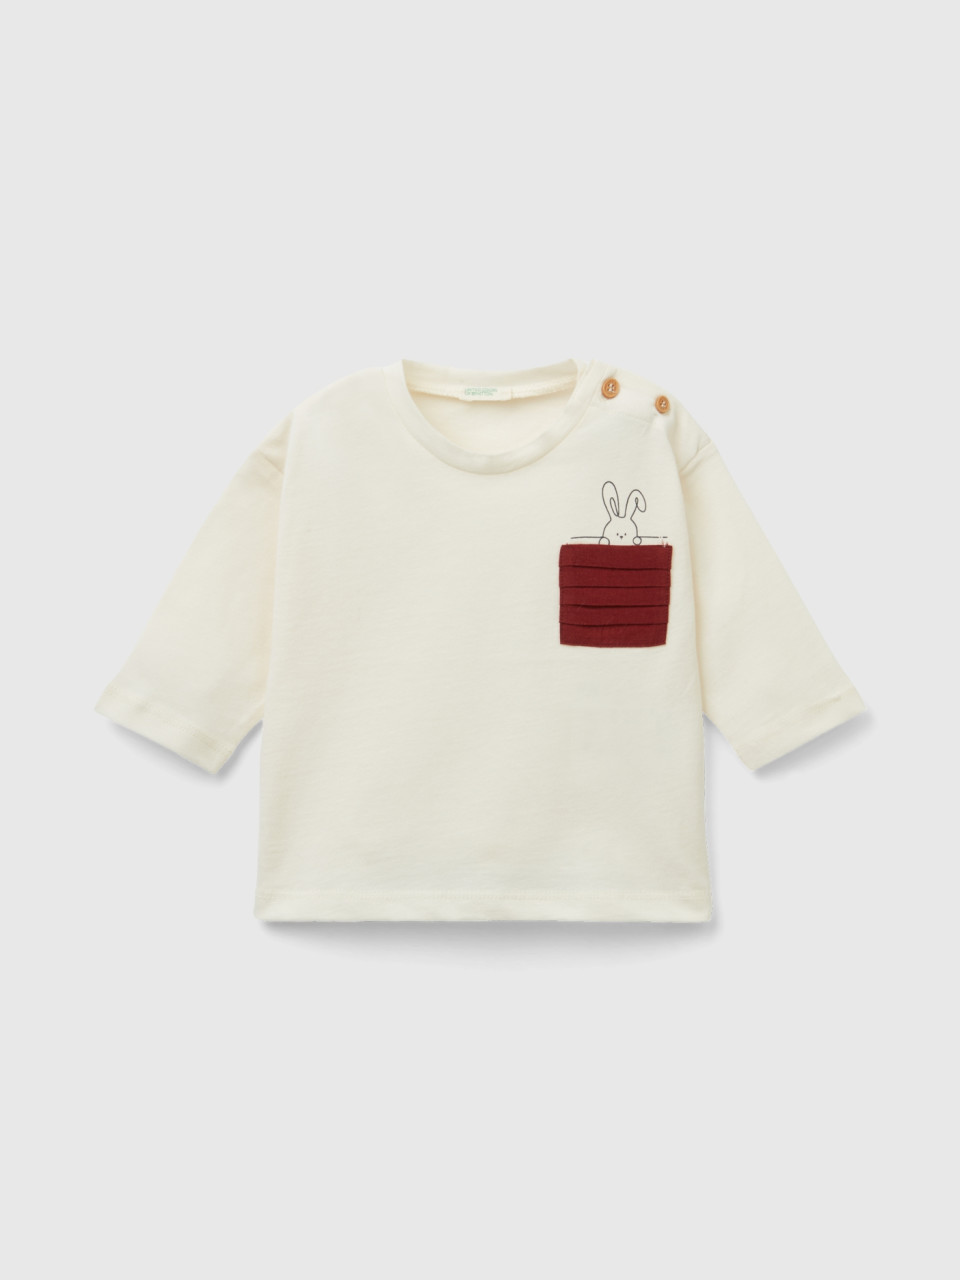 Benetton, T-shirt With Pleated Pocket, Creamy White, Kids